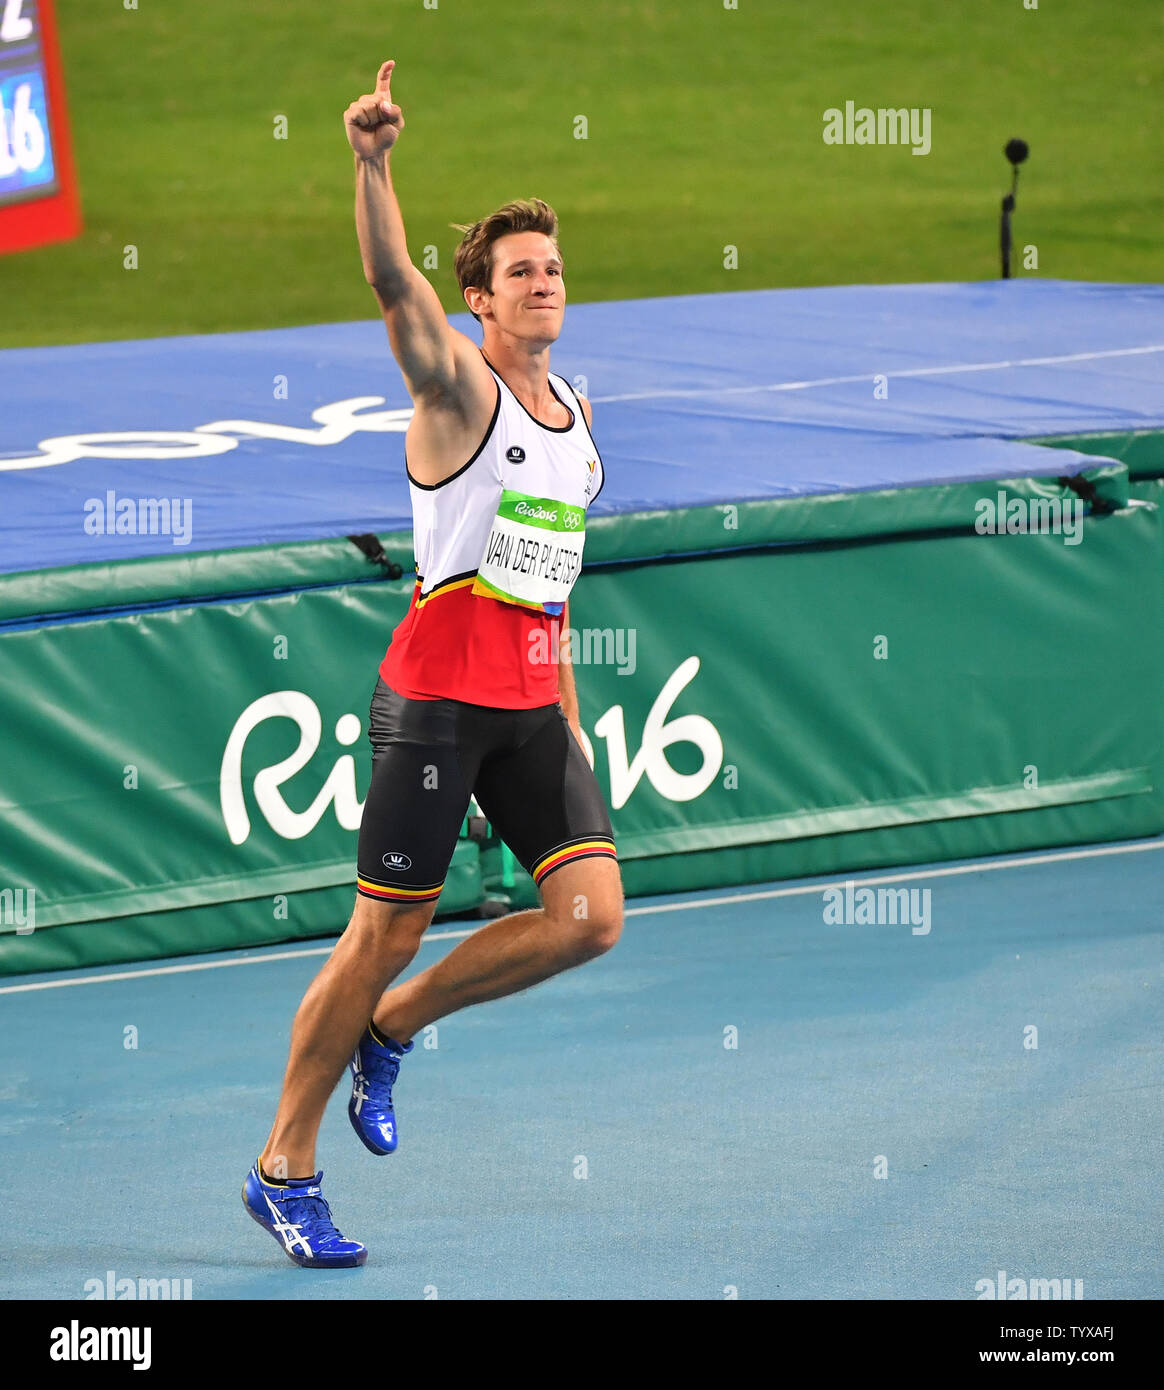 Thomas Van der Plaetsen of Belgium reacts after a jump when he competes in the Men's Decathlon High Jump at the Olympic Stadium at the 2016 Rio Summer Olympics in Rio de Janeiro, Brazil, on August 17, 2016.        Photo by Kevin Dietsch/UPI Stock Photo